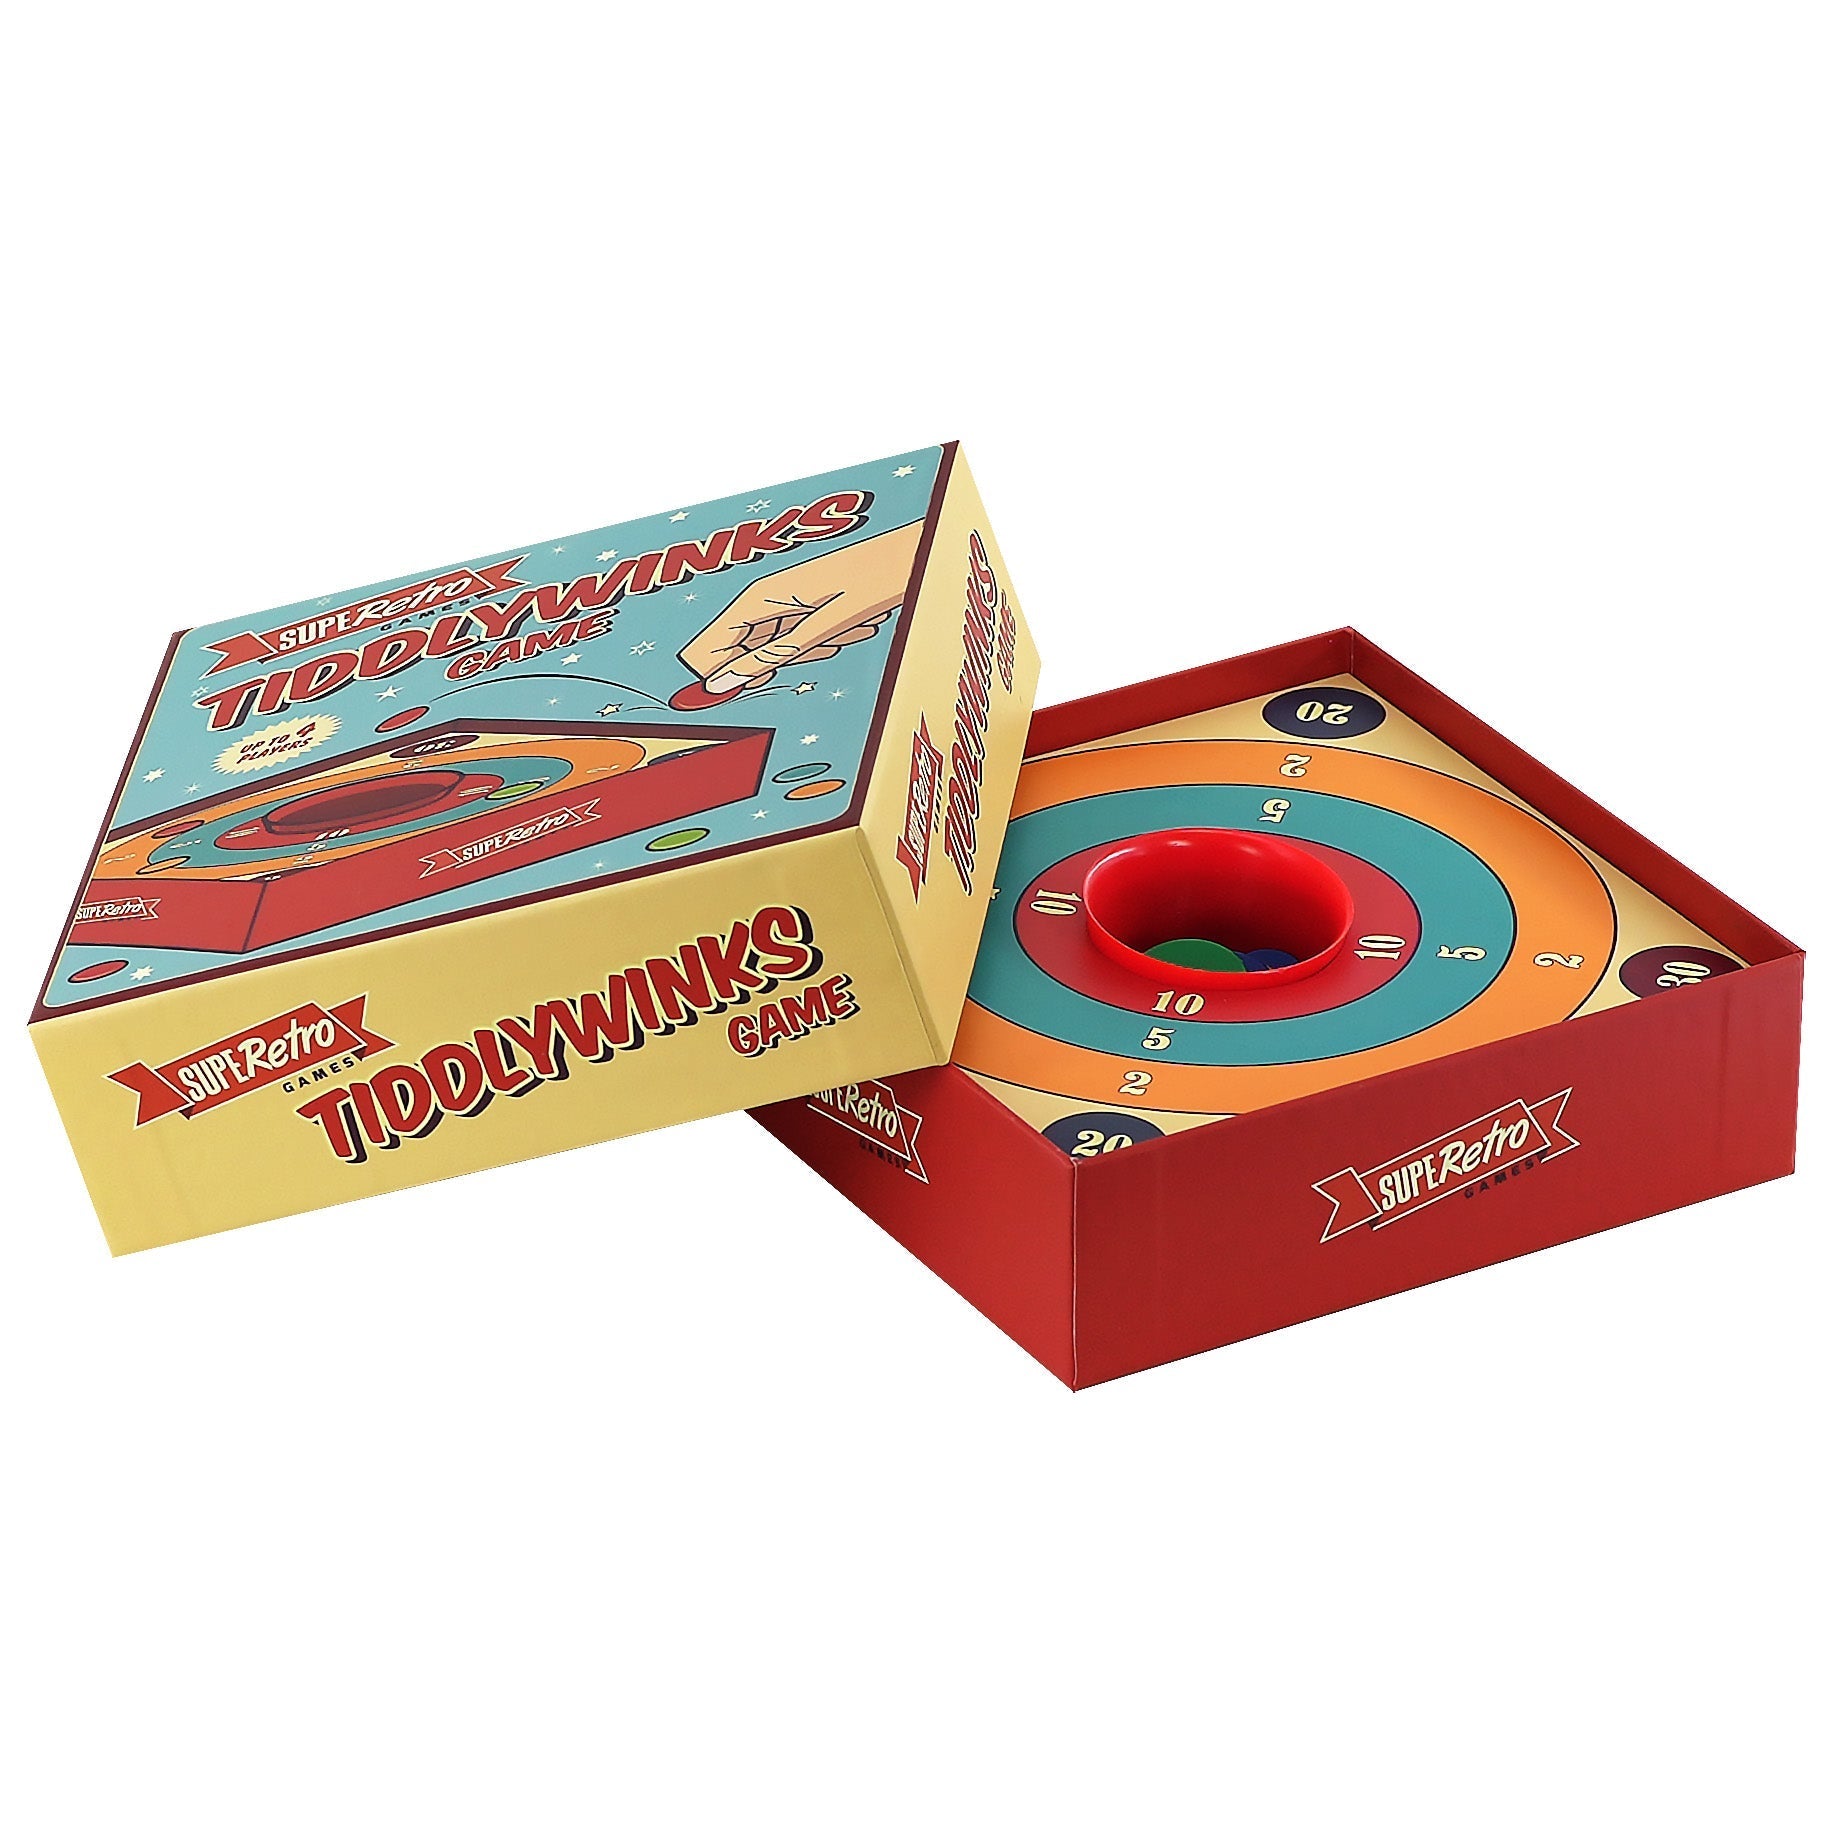 Traditional Tiddlywinks Game for 4 Players The Magic Toy Shop - The Magic Toy Shop